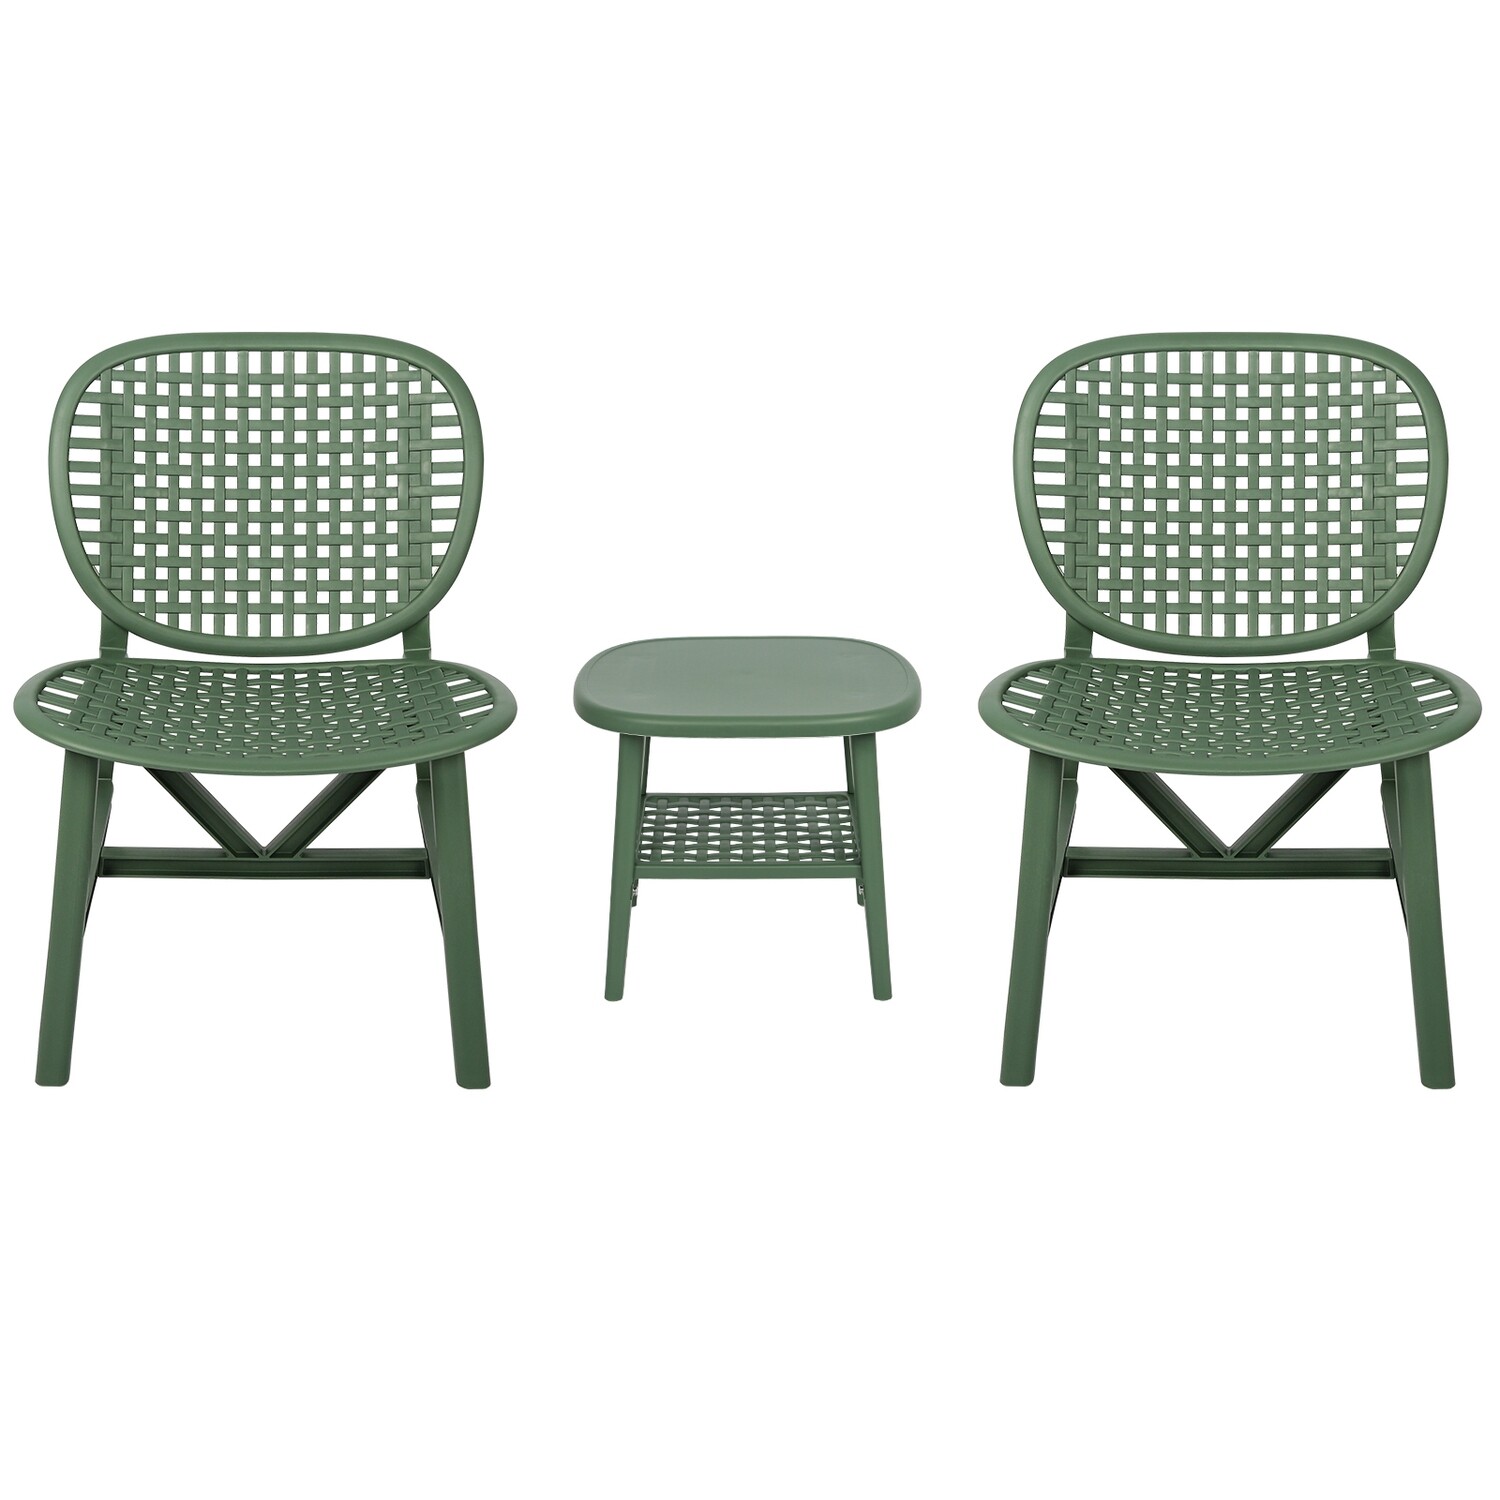 3-Piece Hollow Design Retro Patio Table Chair Set All Weather Conversation Bistro Set Outdoor Table with Open Shelf and Lounge Chairs with Widened Seat for Balcony Garden Yard White, Options: Green+Polypropylene